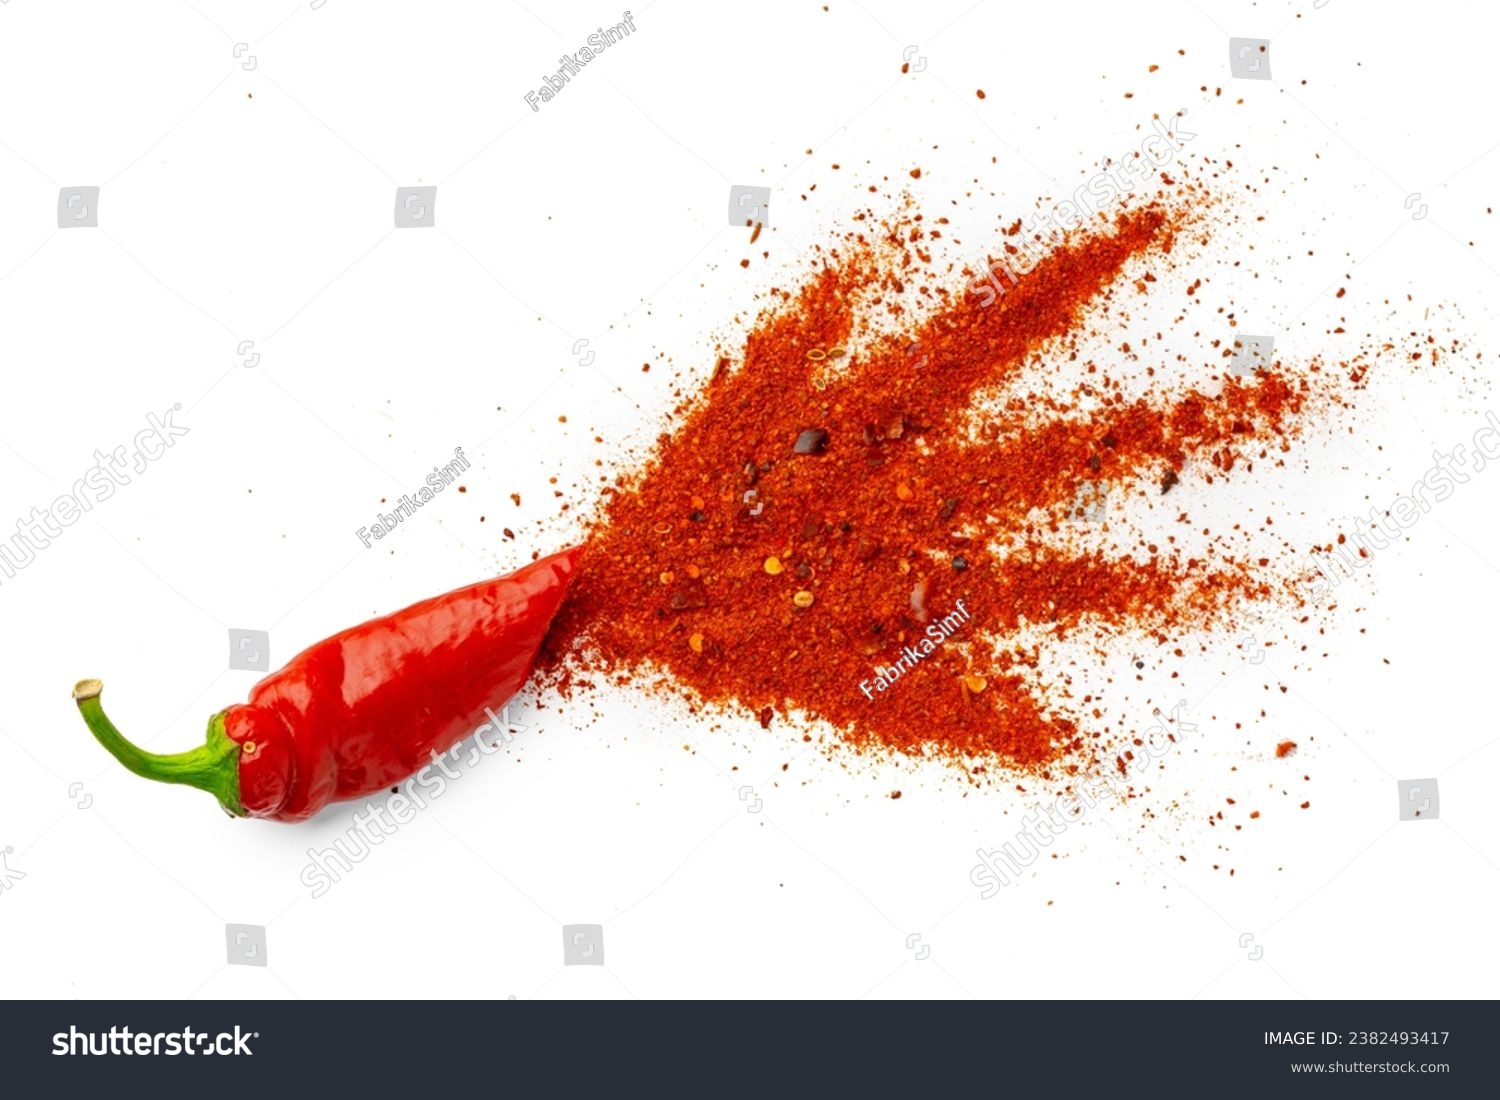 Pile of red paprika powder isolated on white background #2382493417